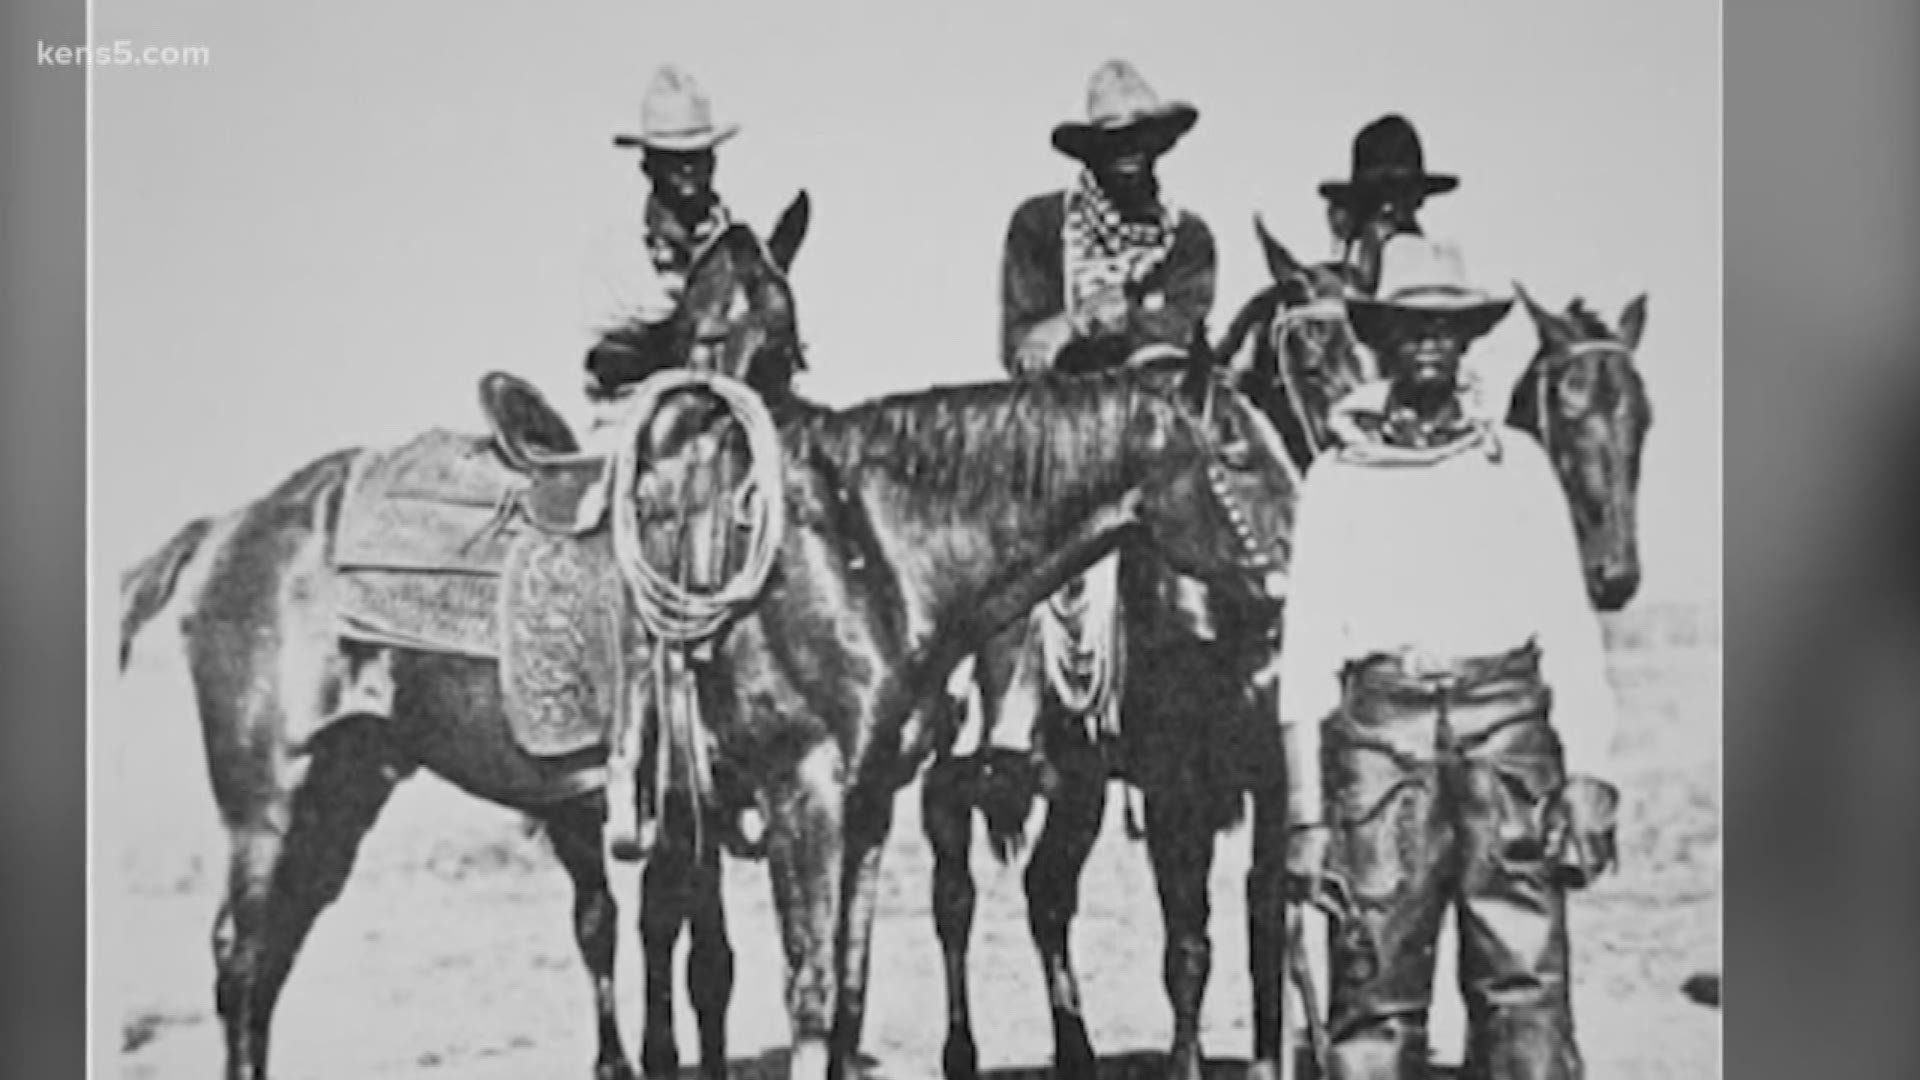 June 19, 1865…Freedom Day. General Gordon Granger's declaration echoed from the beaches of Galveston through the hills and plains of Texas. The black man was free and with his ample experience in horsemanship unchained, many African American Texans became successful ranchers and cowboys.